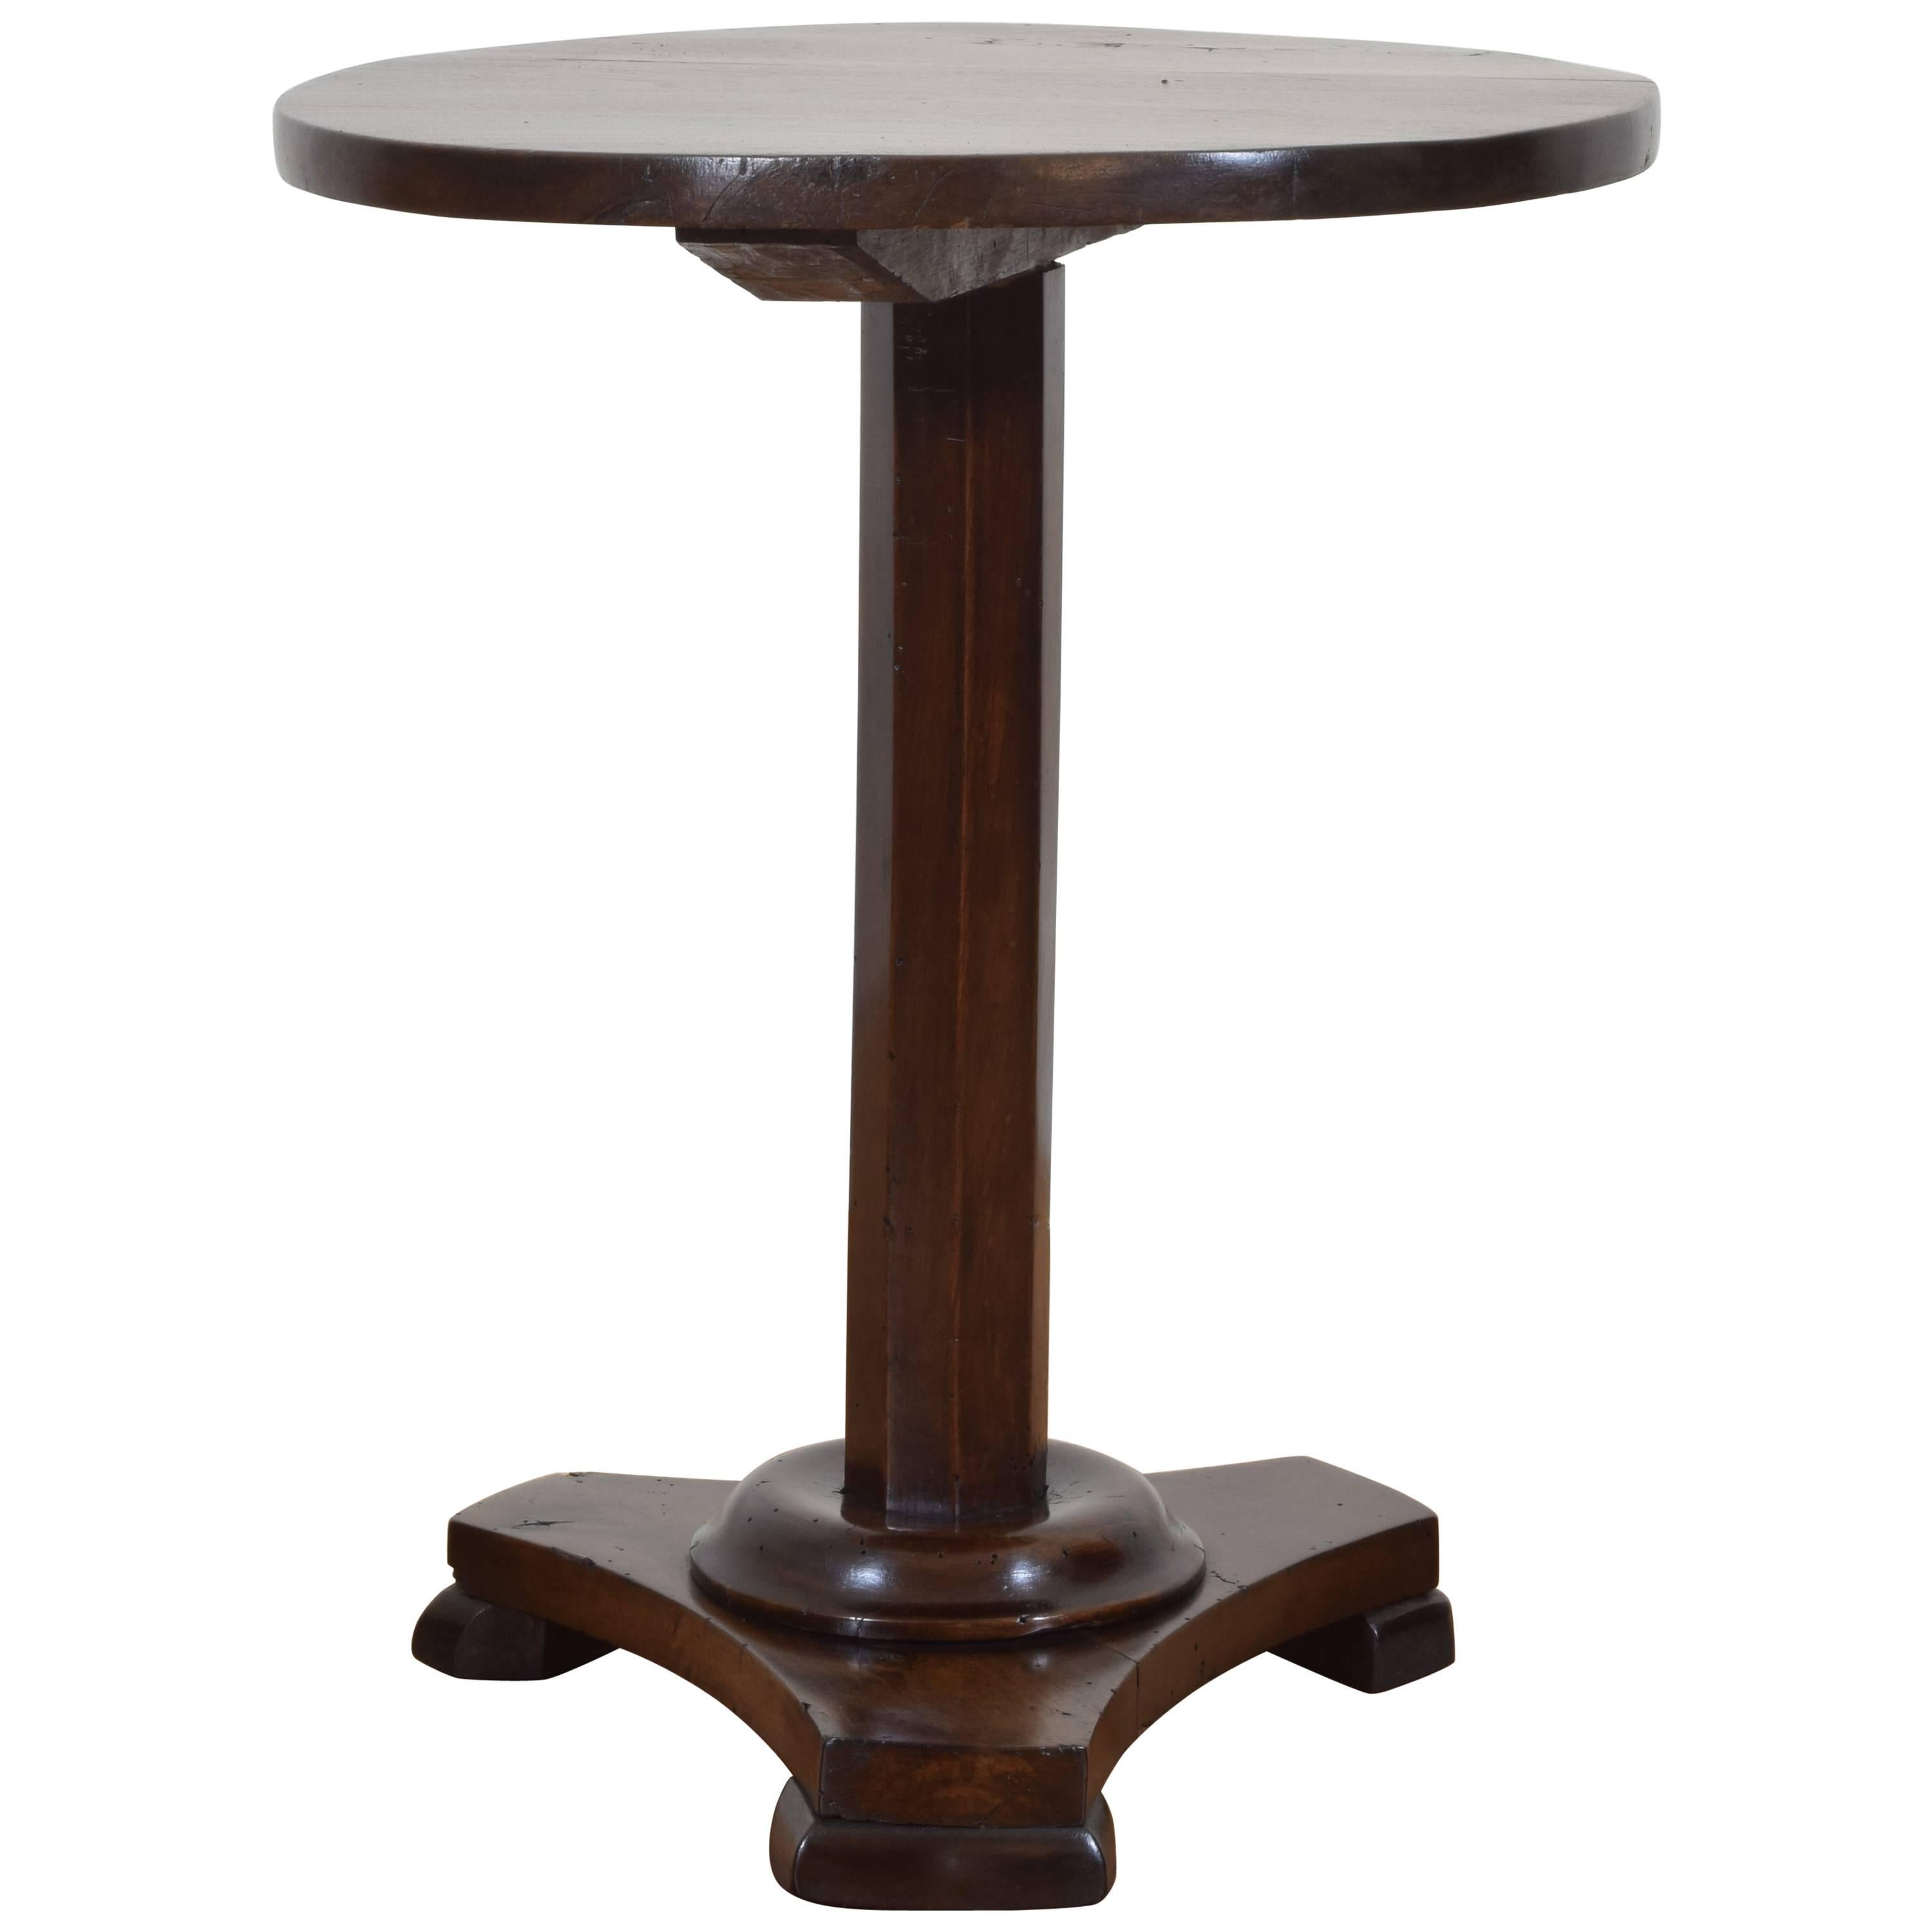 Italian Neoclassic Walnut Side Table, Second Quarter of the 19th Century